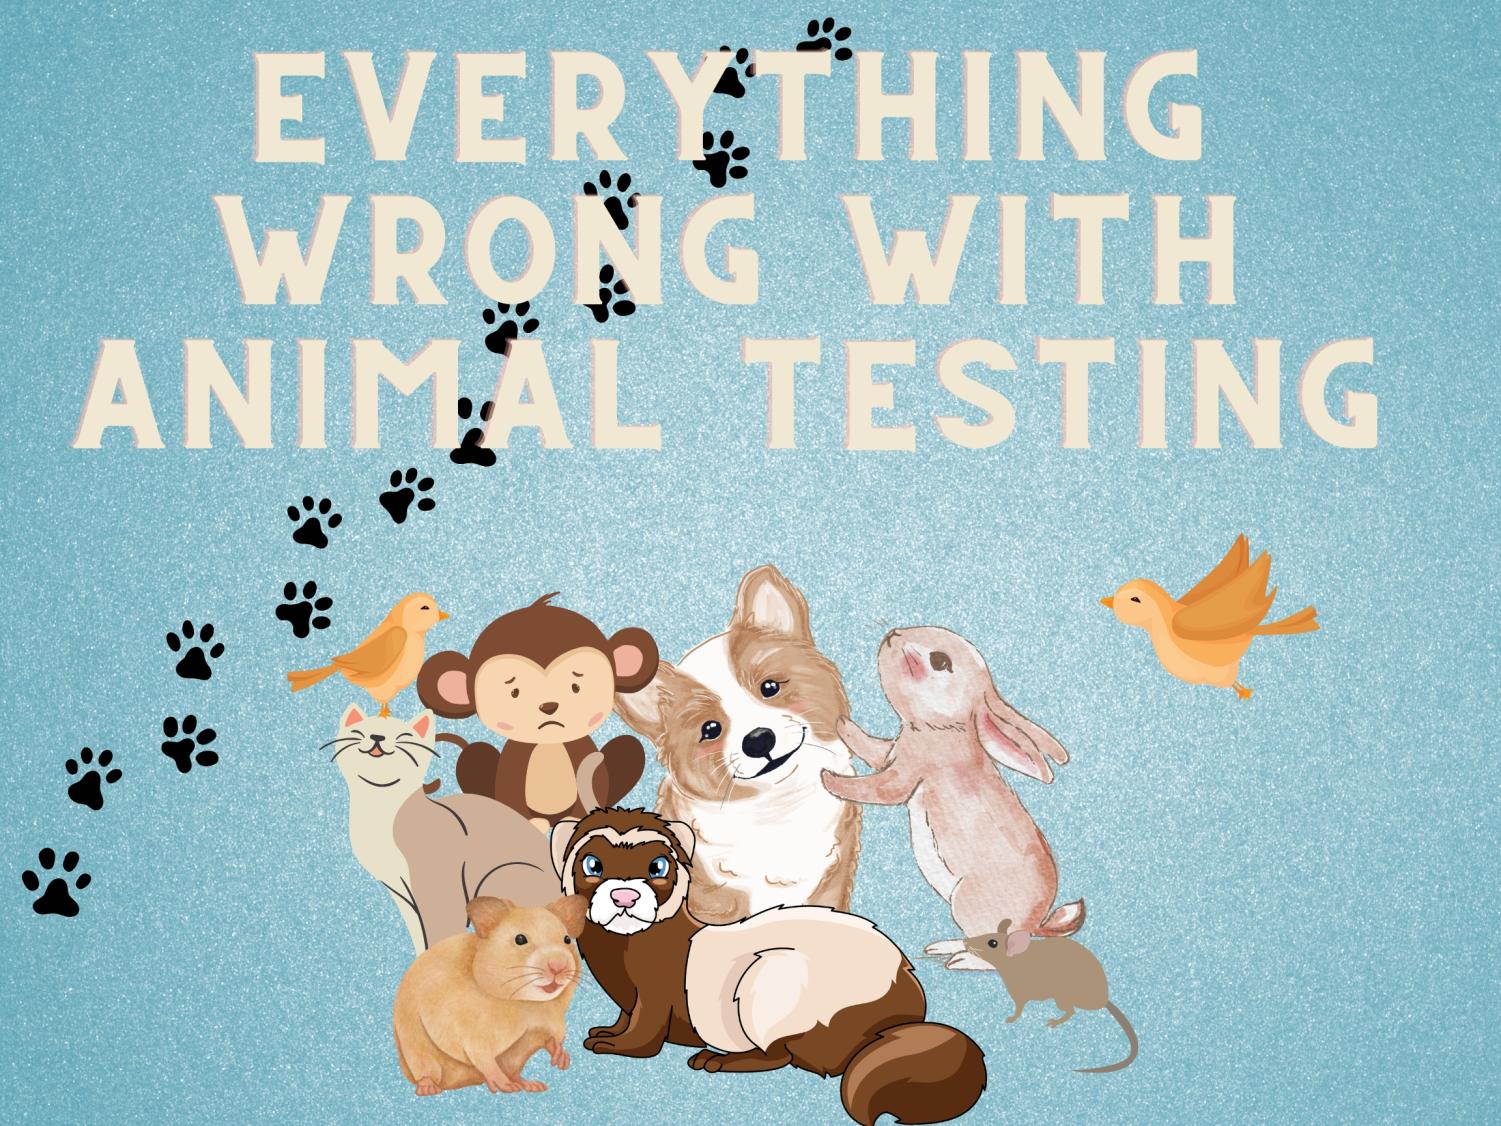 We can do better than animal testing – The Howler